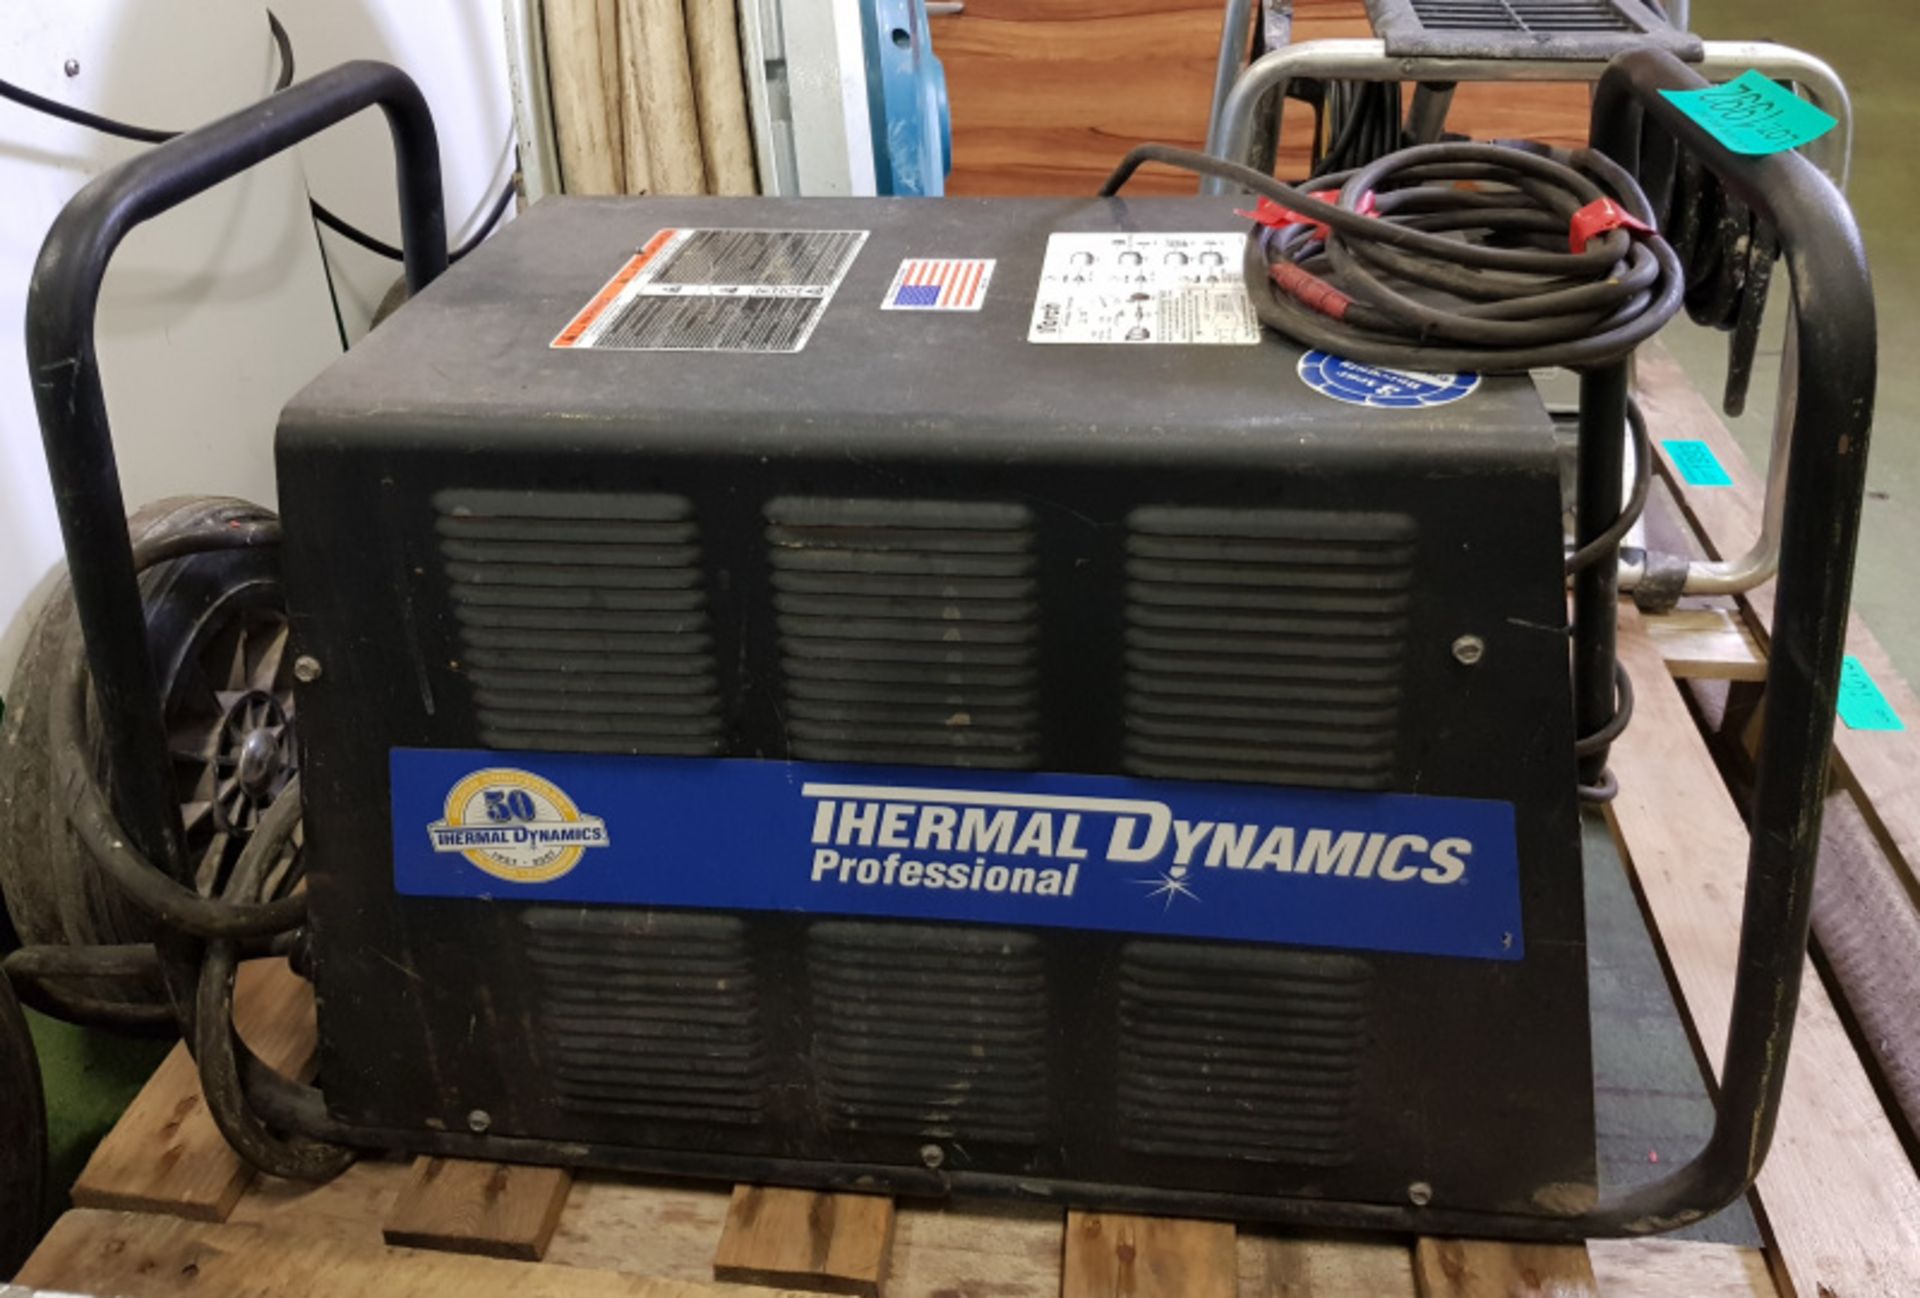 Thermal Dynamics Pro Cutmaster 101 3 phase plasma cutter welder - Image 2 of 4